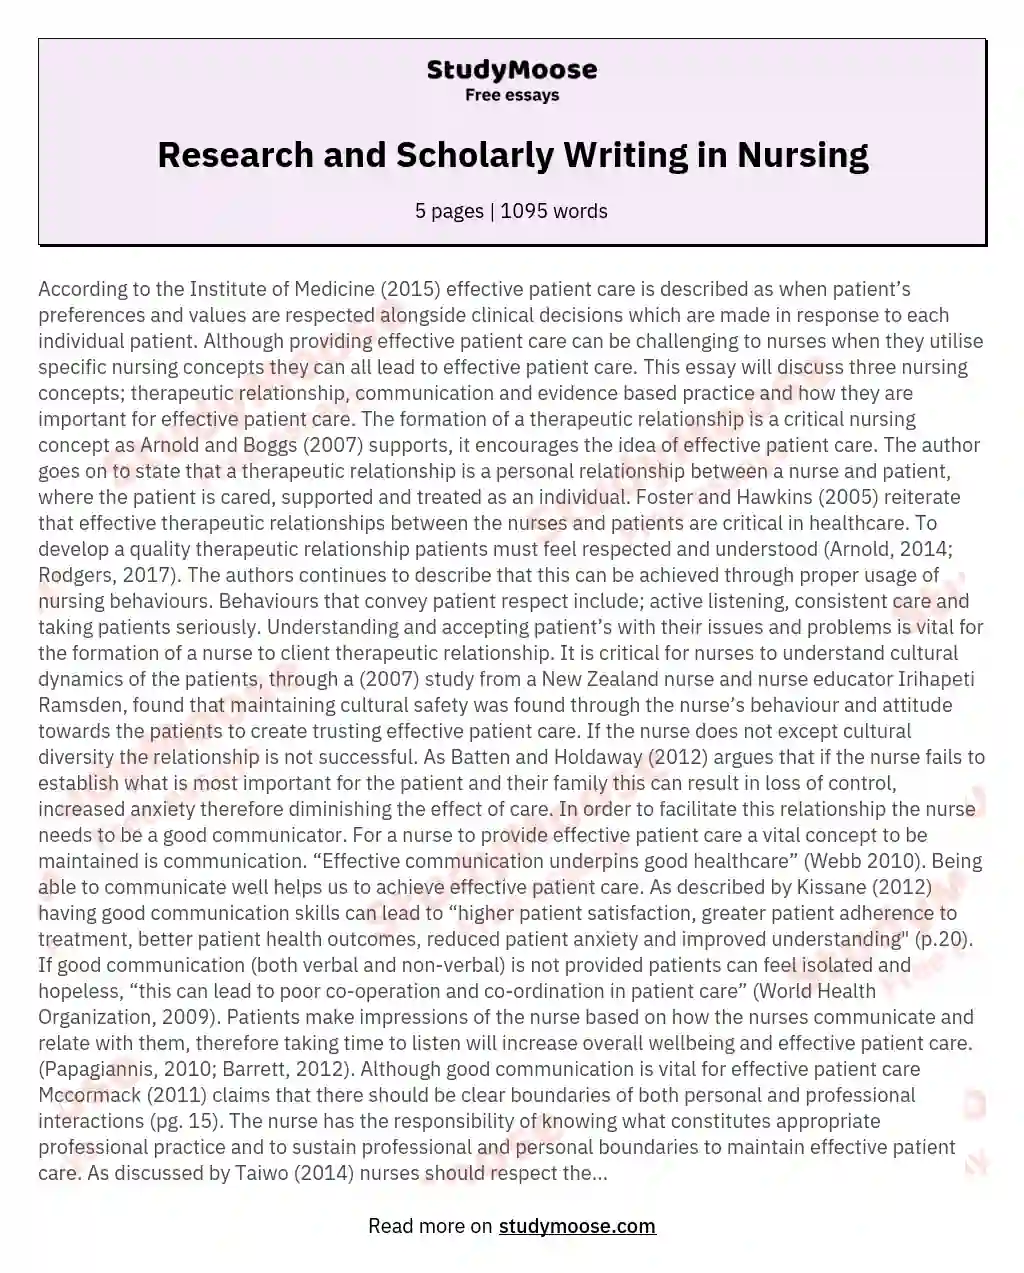 Research and Scholarly Writing in Nursing essay